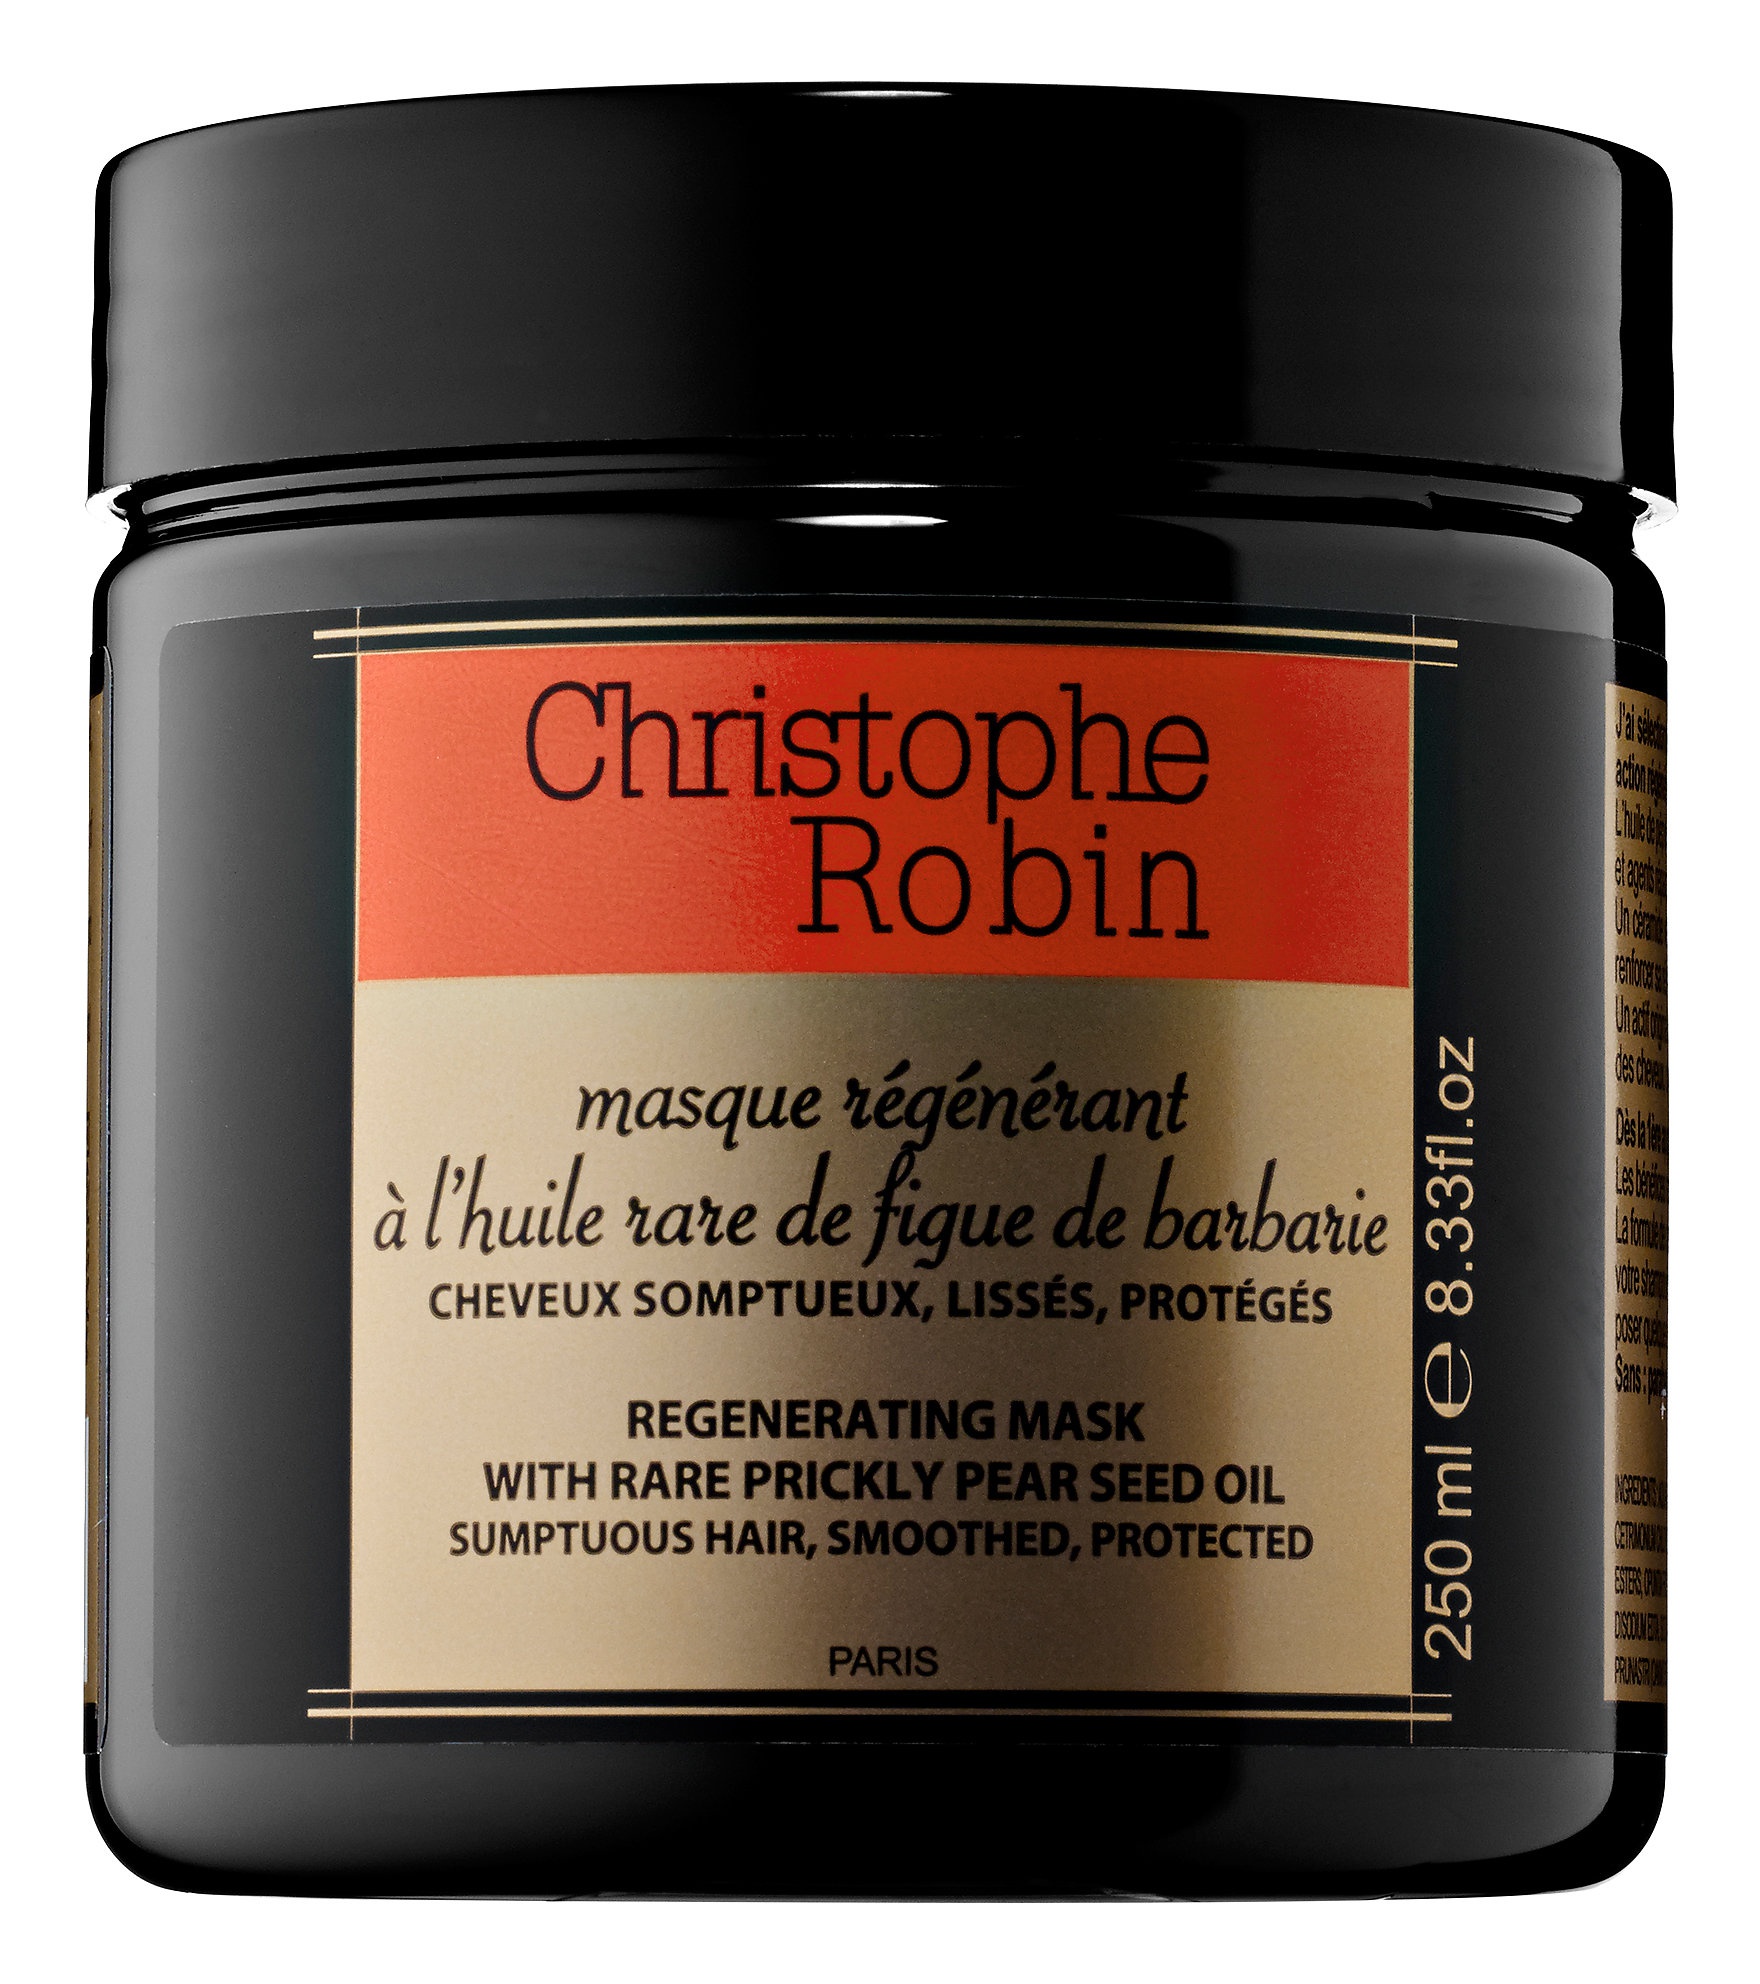 Christophe Robin Regenerating mask with rare prickly pear seed oil